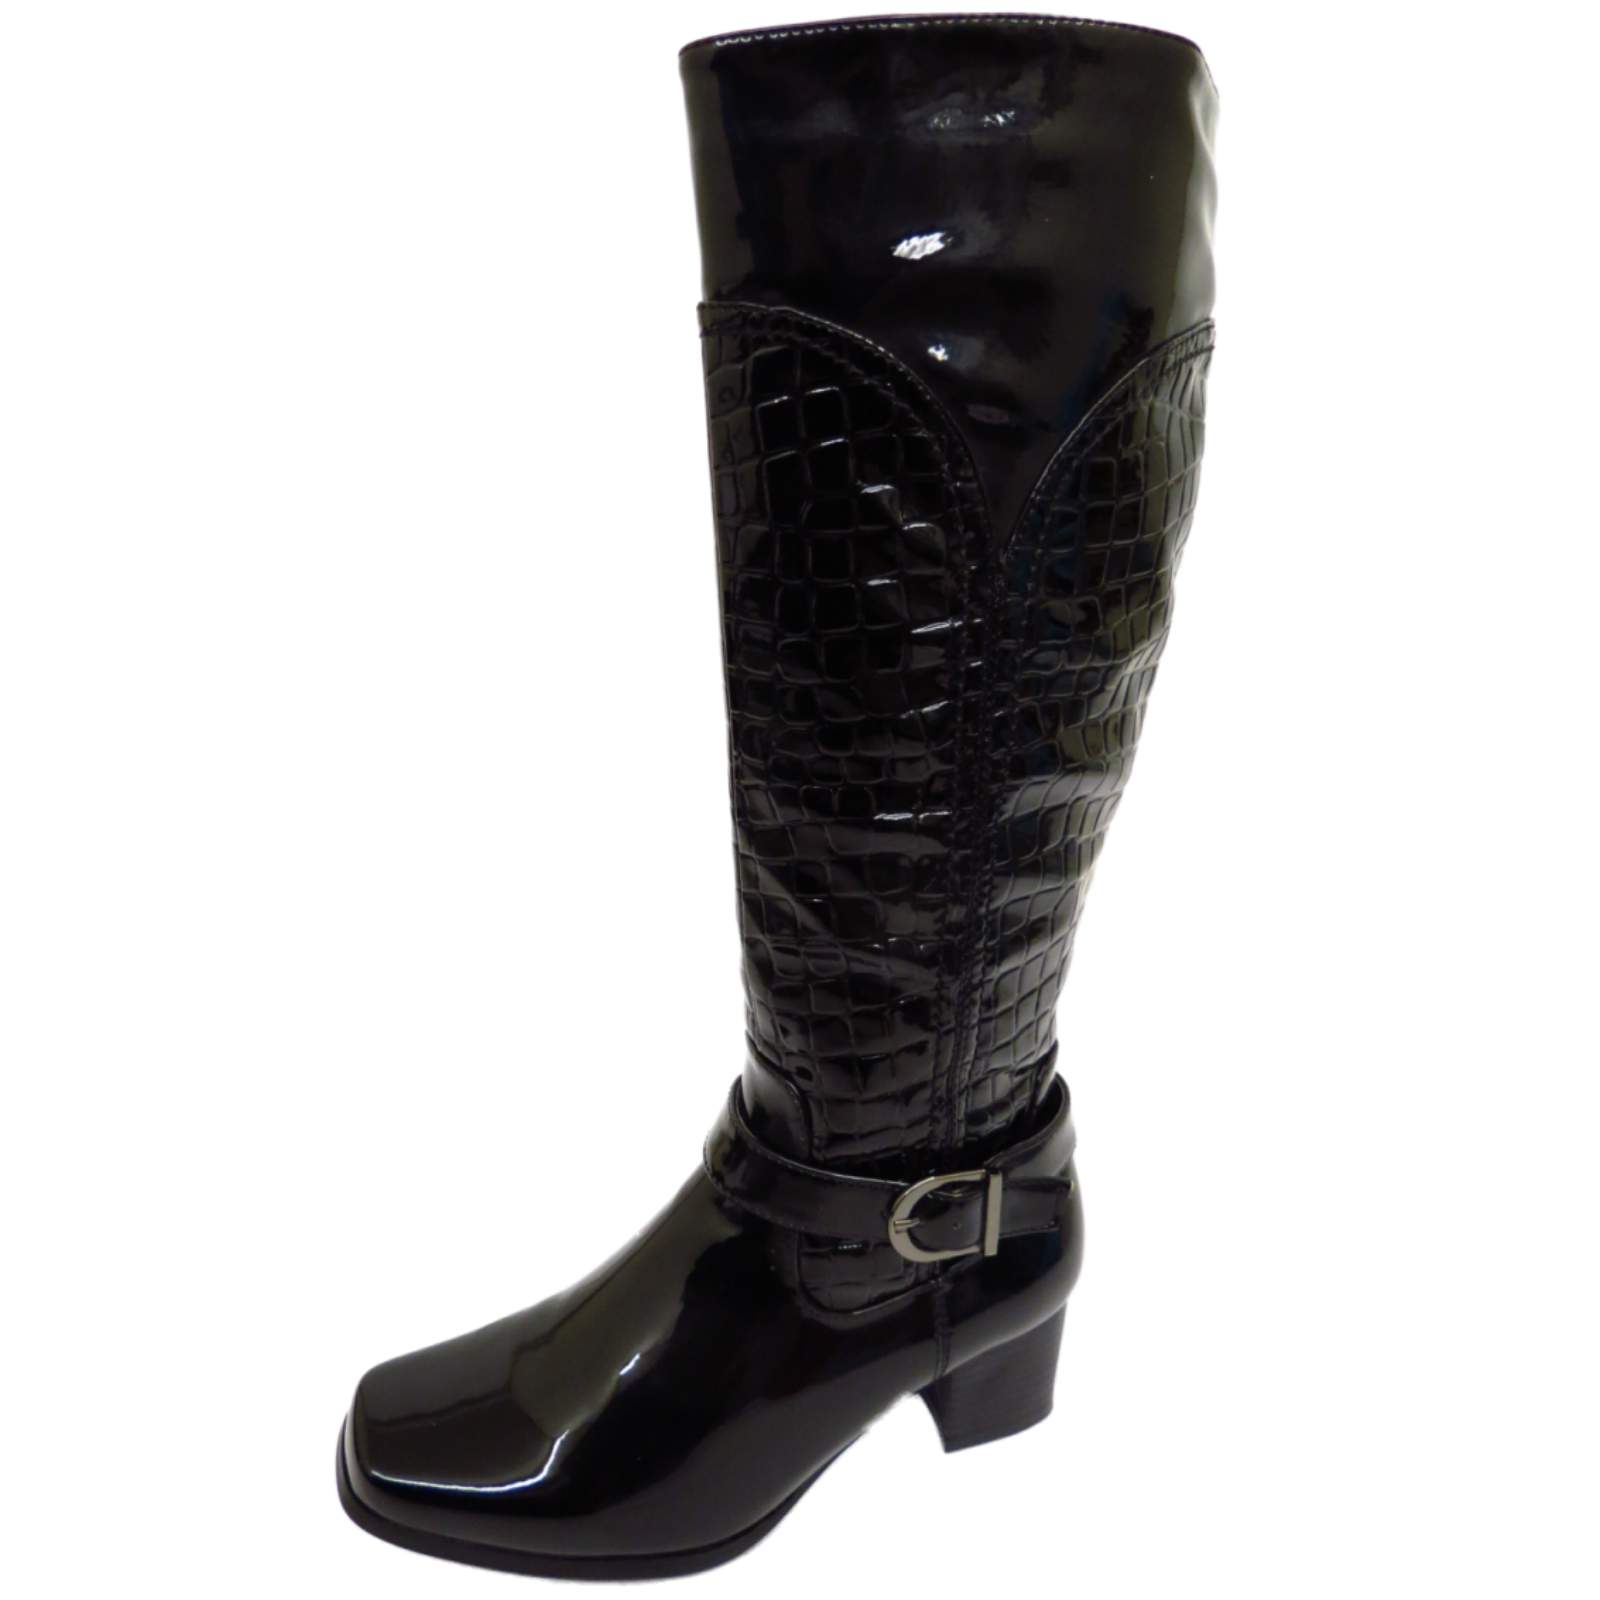 LOW HEEL WINTER PATENT TALL BOOTS SIZES 